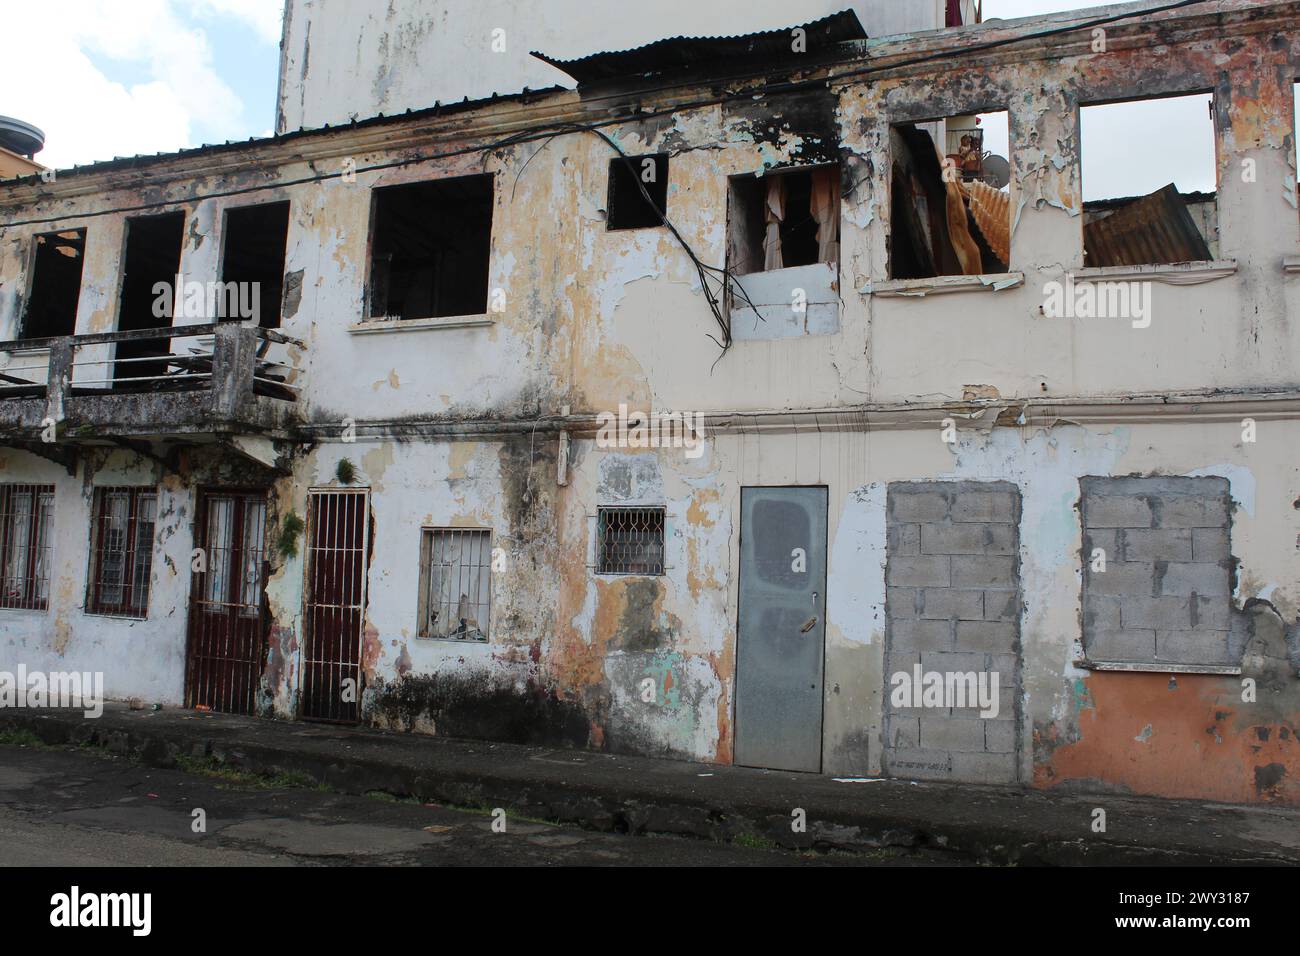 Abandoned and burned two-story building in Fort-de-France, Martinique with danger spraypainted on it Stock Photo